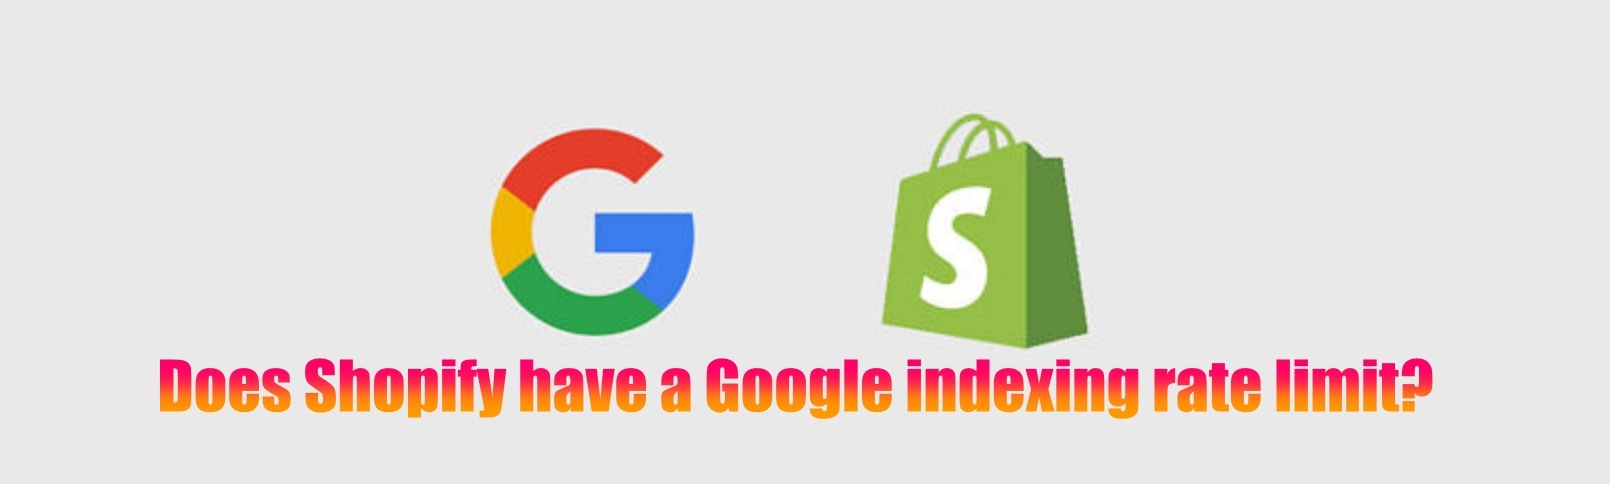 Shopify Product Google Indexing